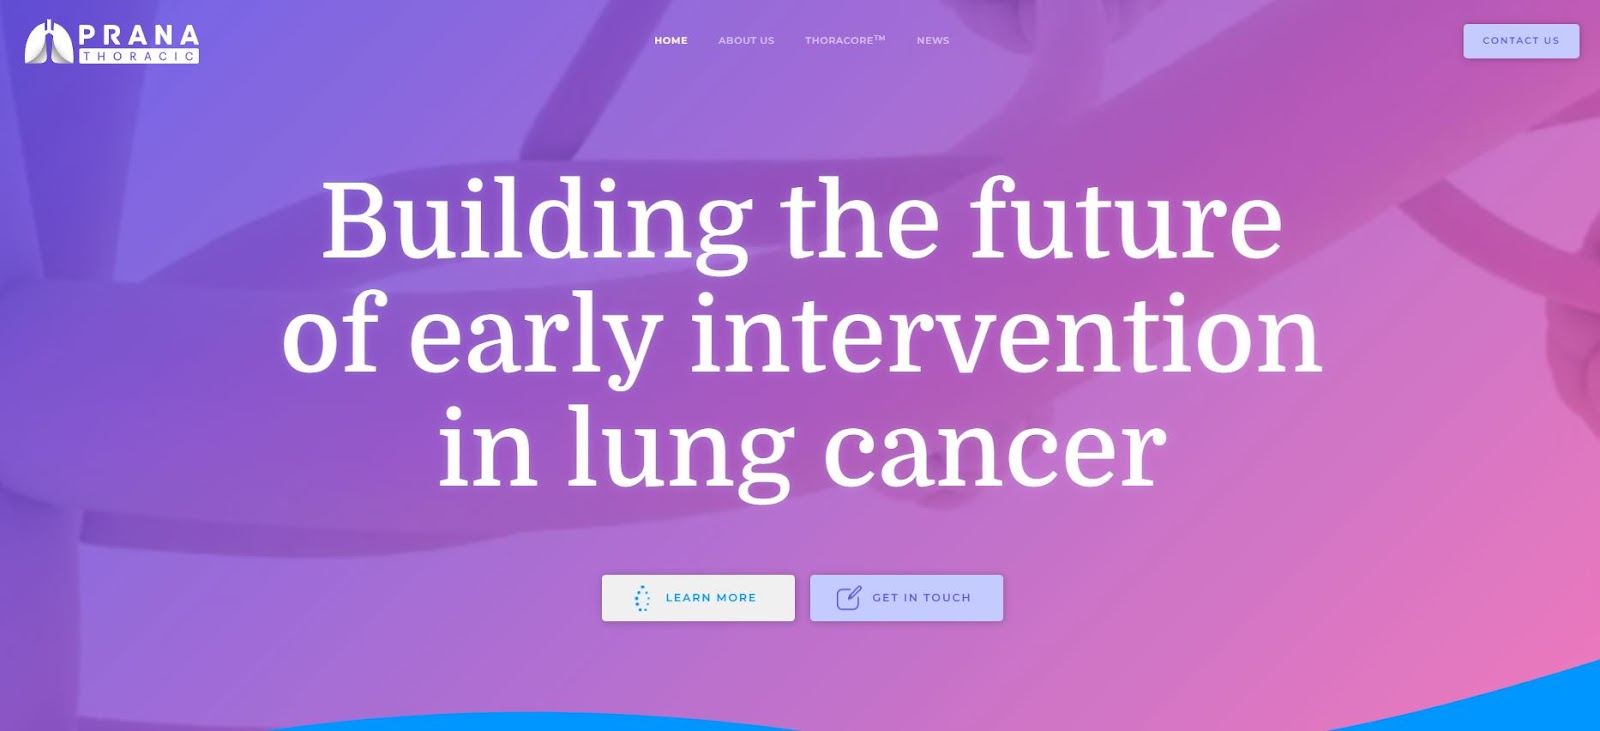 Prana Thoracic aims to give physicians the opportunity to drive early intervention in lung cancer